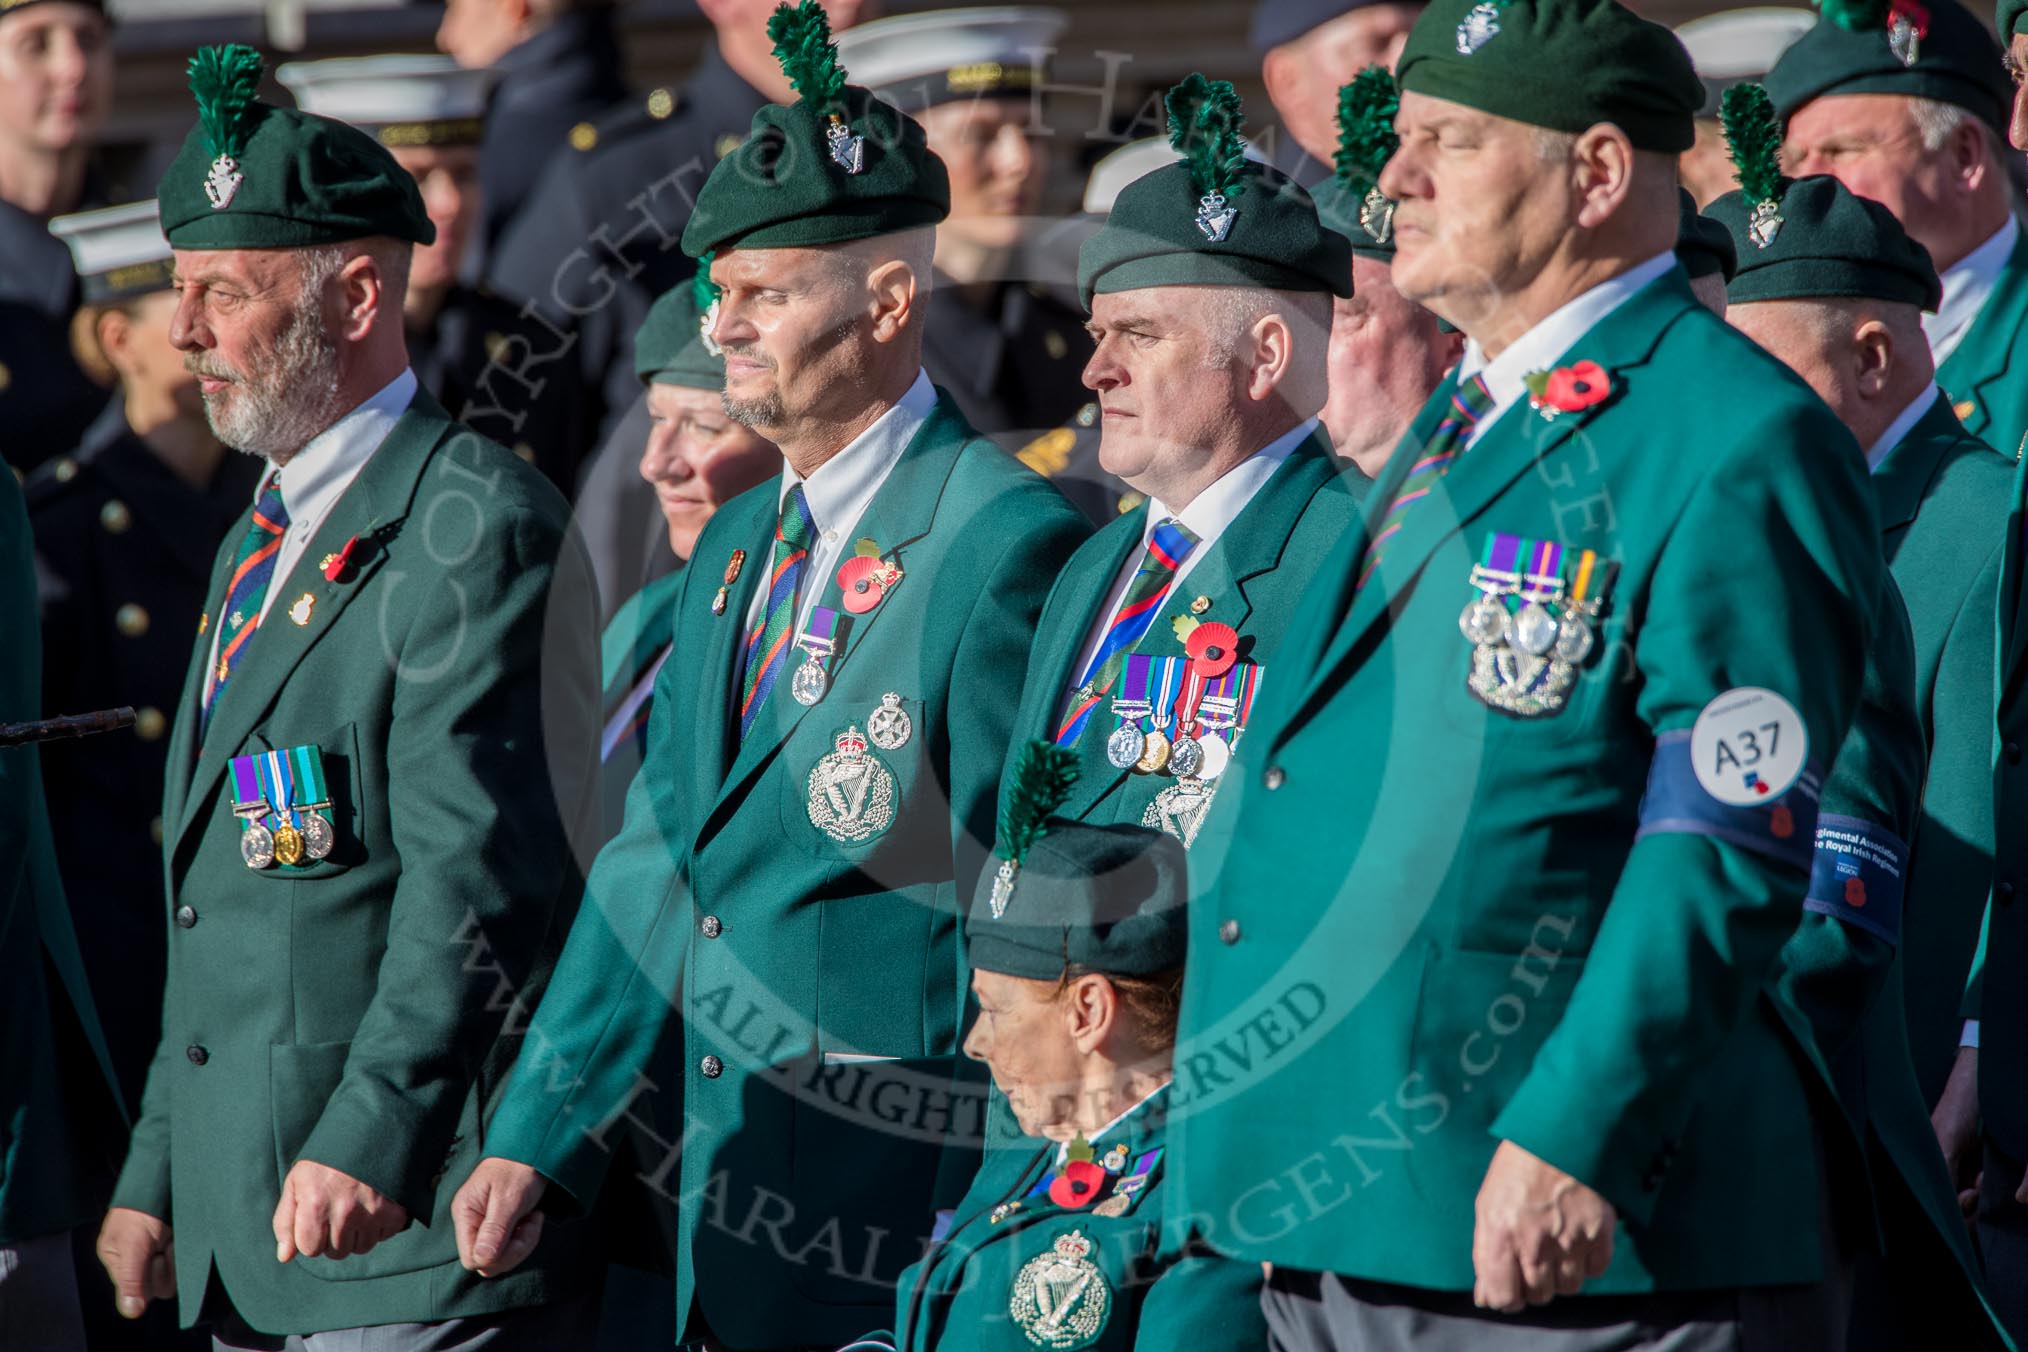 Regimental Association  of the Royal Irish Association (Group A37, 39 members) during the Royal British Legion March Past on Remembrance Sunday at the Cenotaph, Whitehall, Westminster, London, 11 November 2018, 12:02.